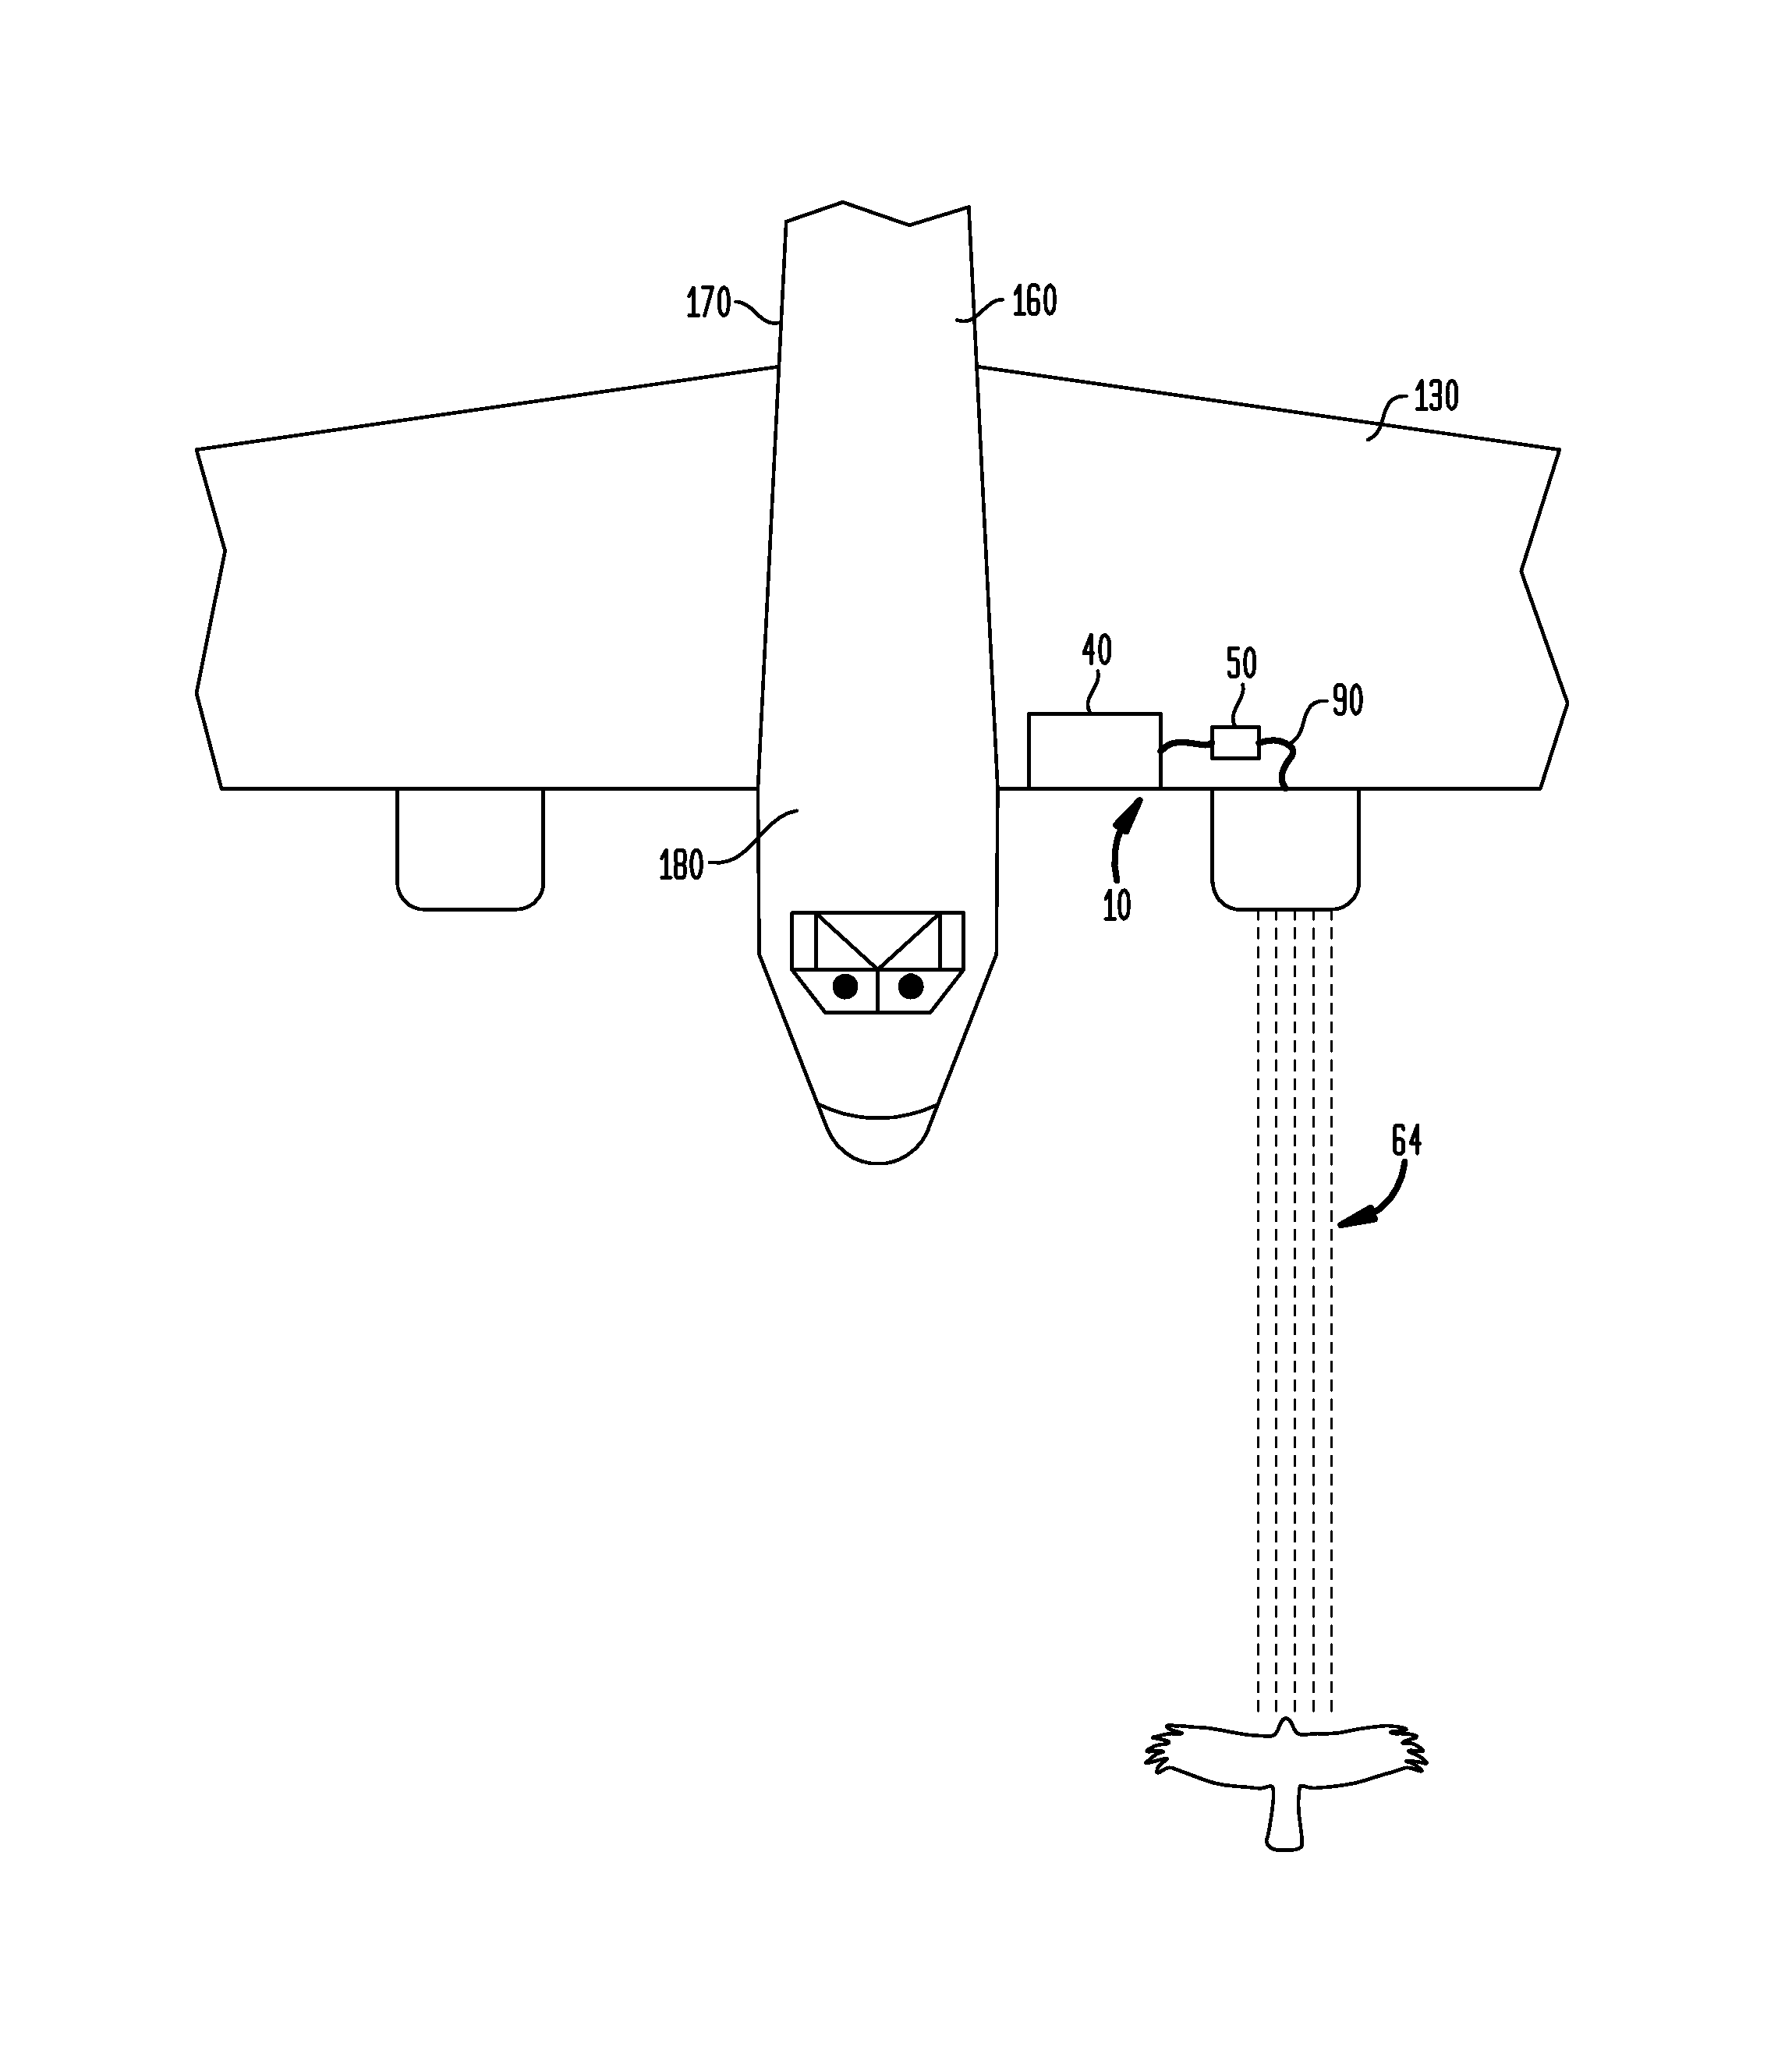 Foreign object damage protection device and system for aircraft